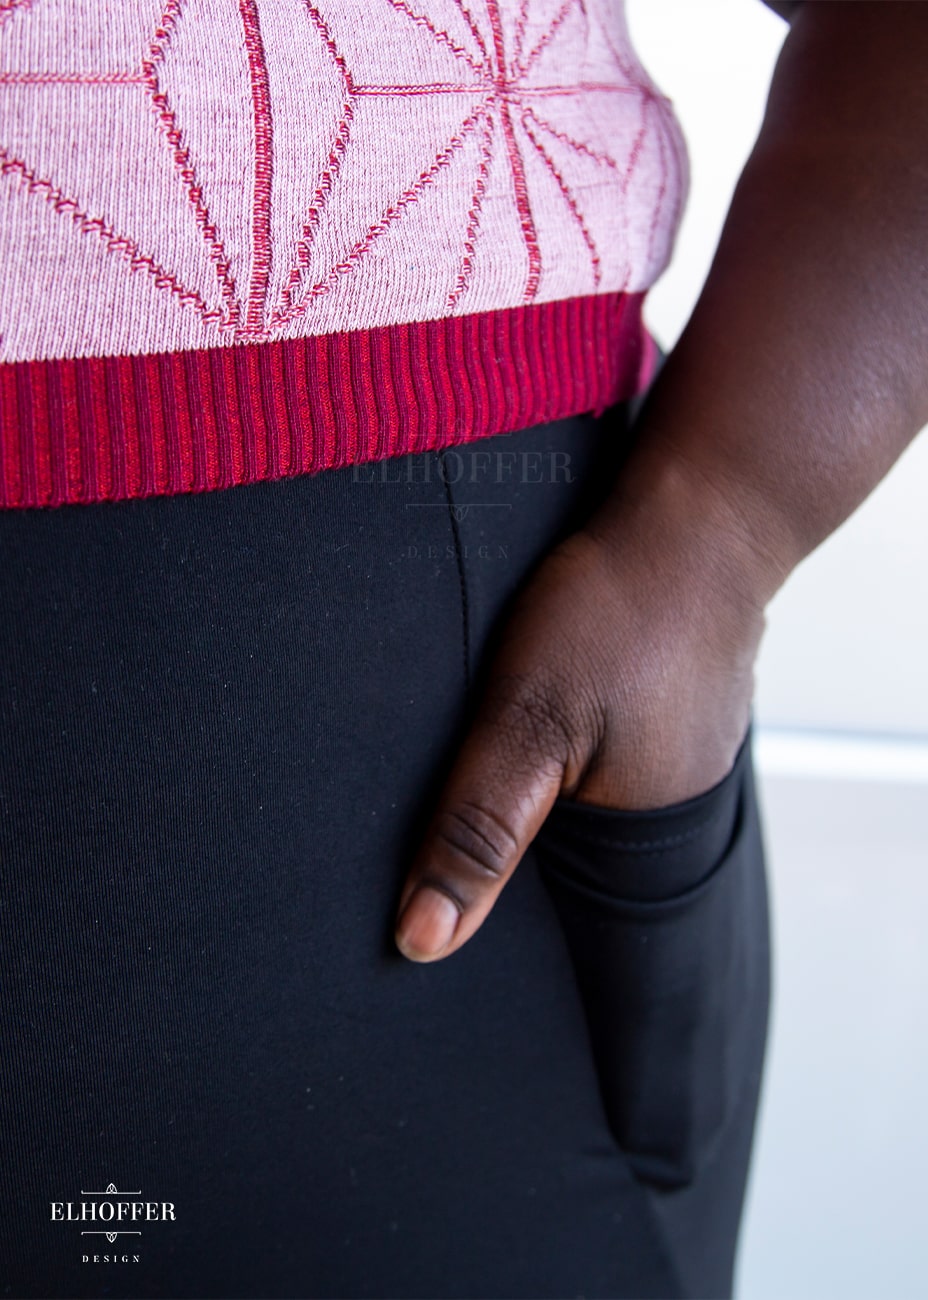 Adalgiza, a dark skinned 4XL model with short curly hair, is wearing a pair of high waisted black leggings with a seamless front and side seam pockets in black.